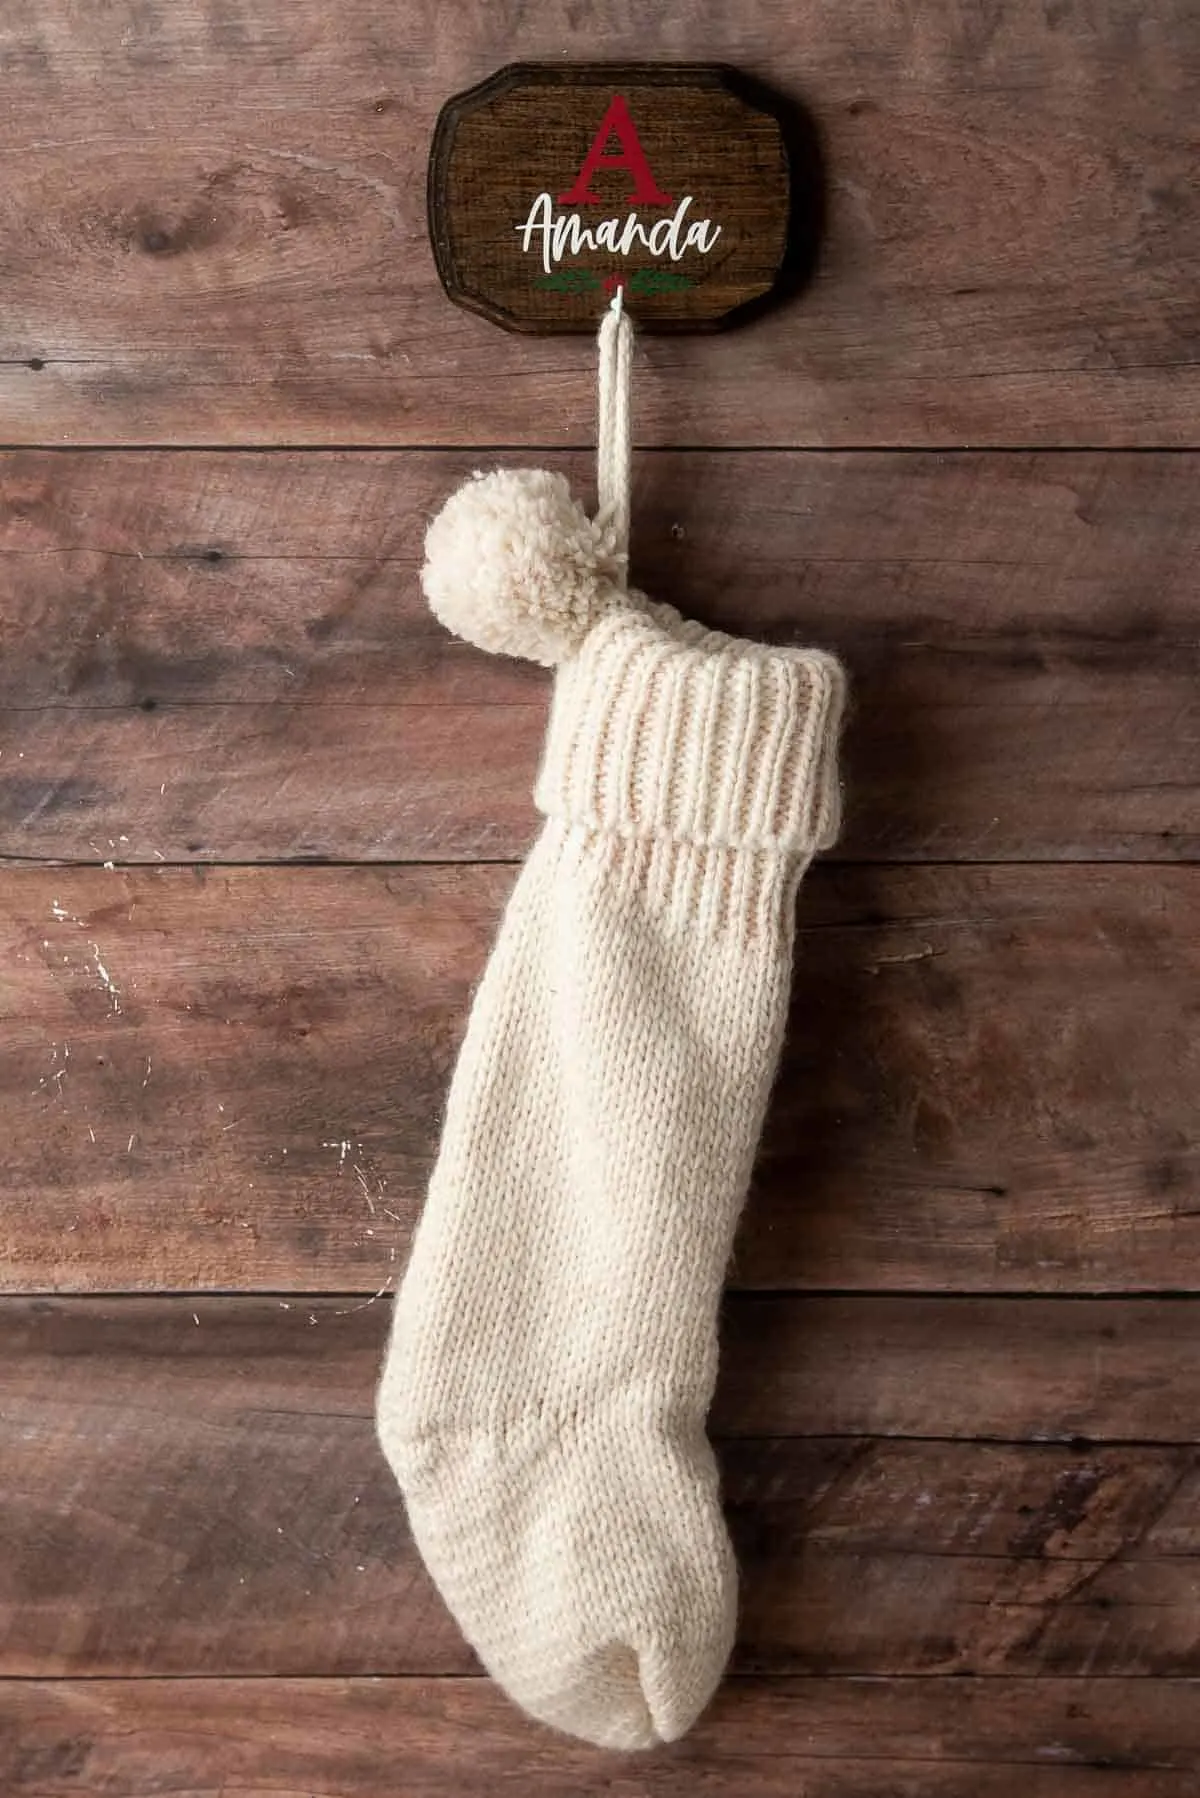 personalized DIY wall mount stocking hanger with knit stocking on wall